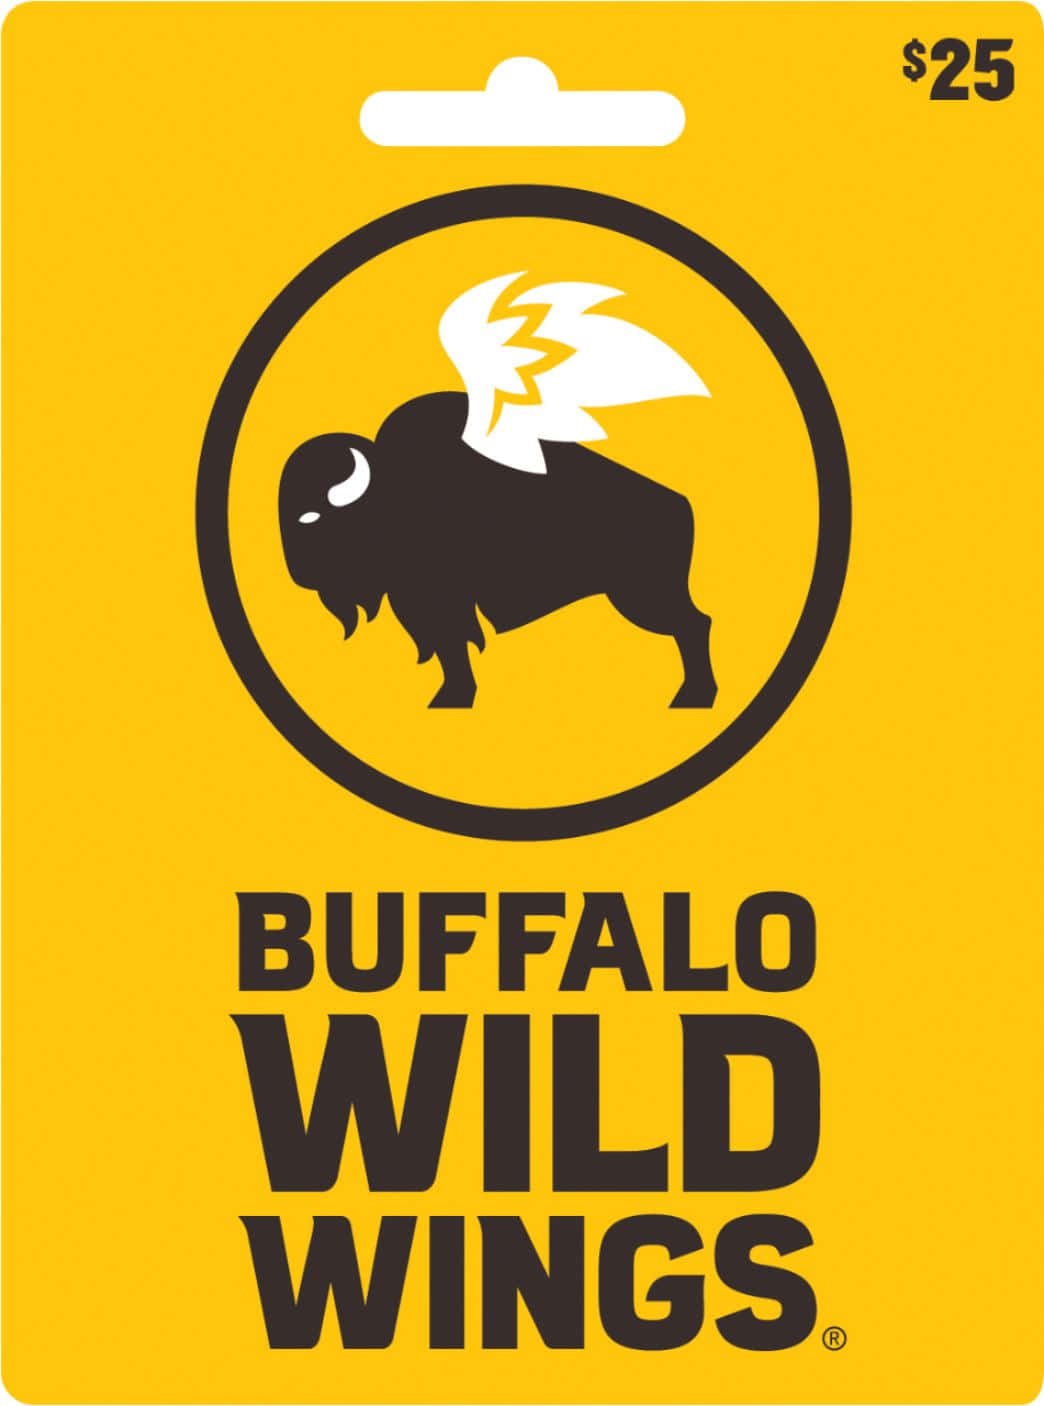 Treat yourself to a delicious meal at Buffalo Wild Wings